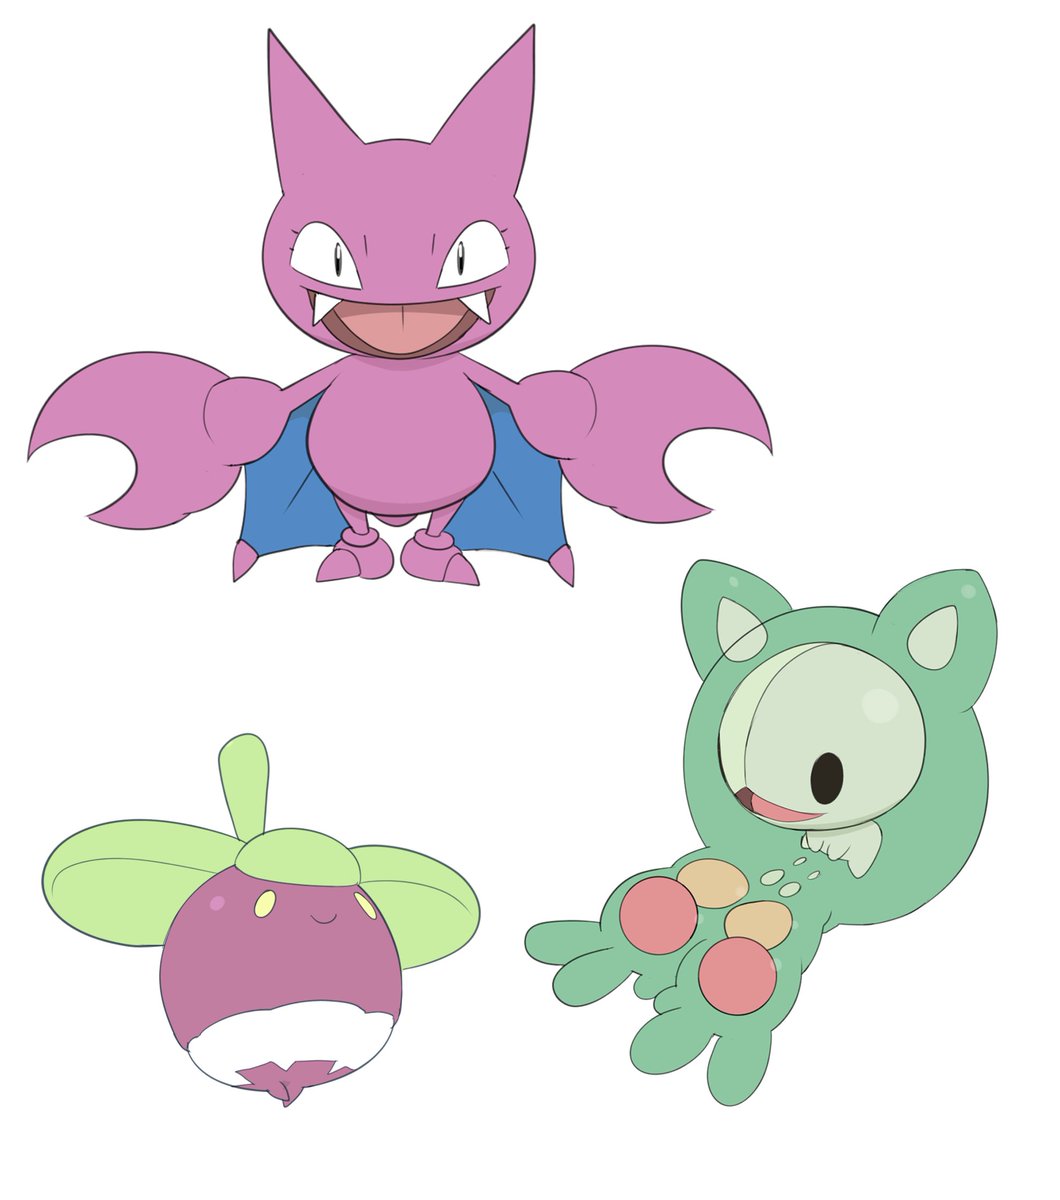 Gligar, Bounsweet, and Reuniclus.